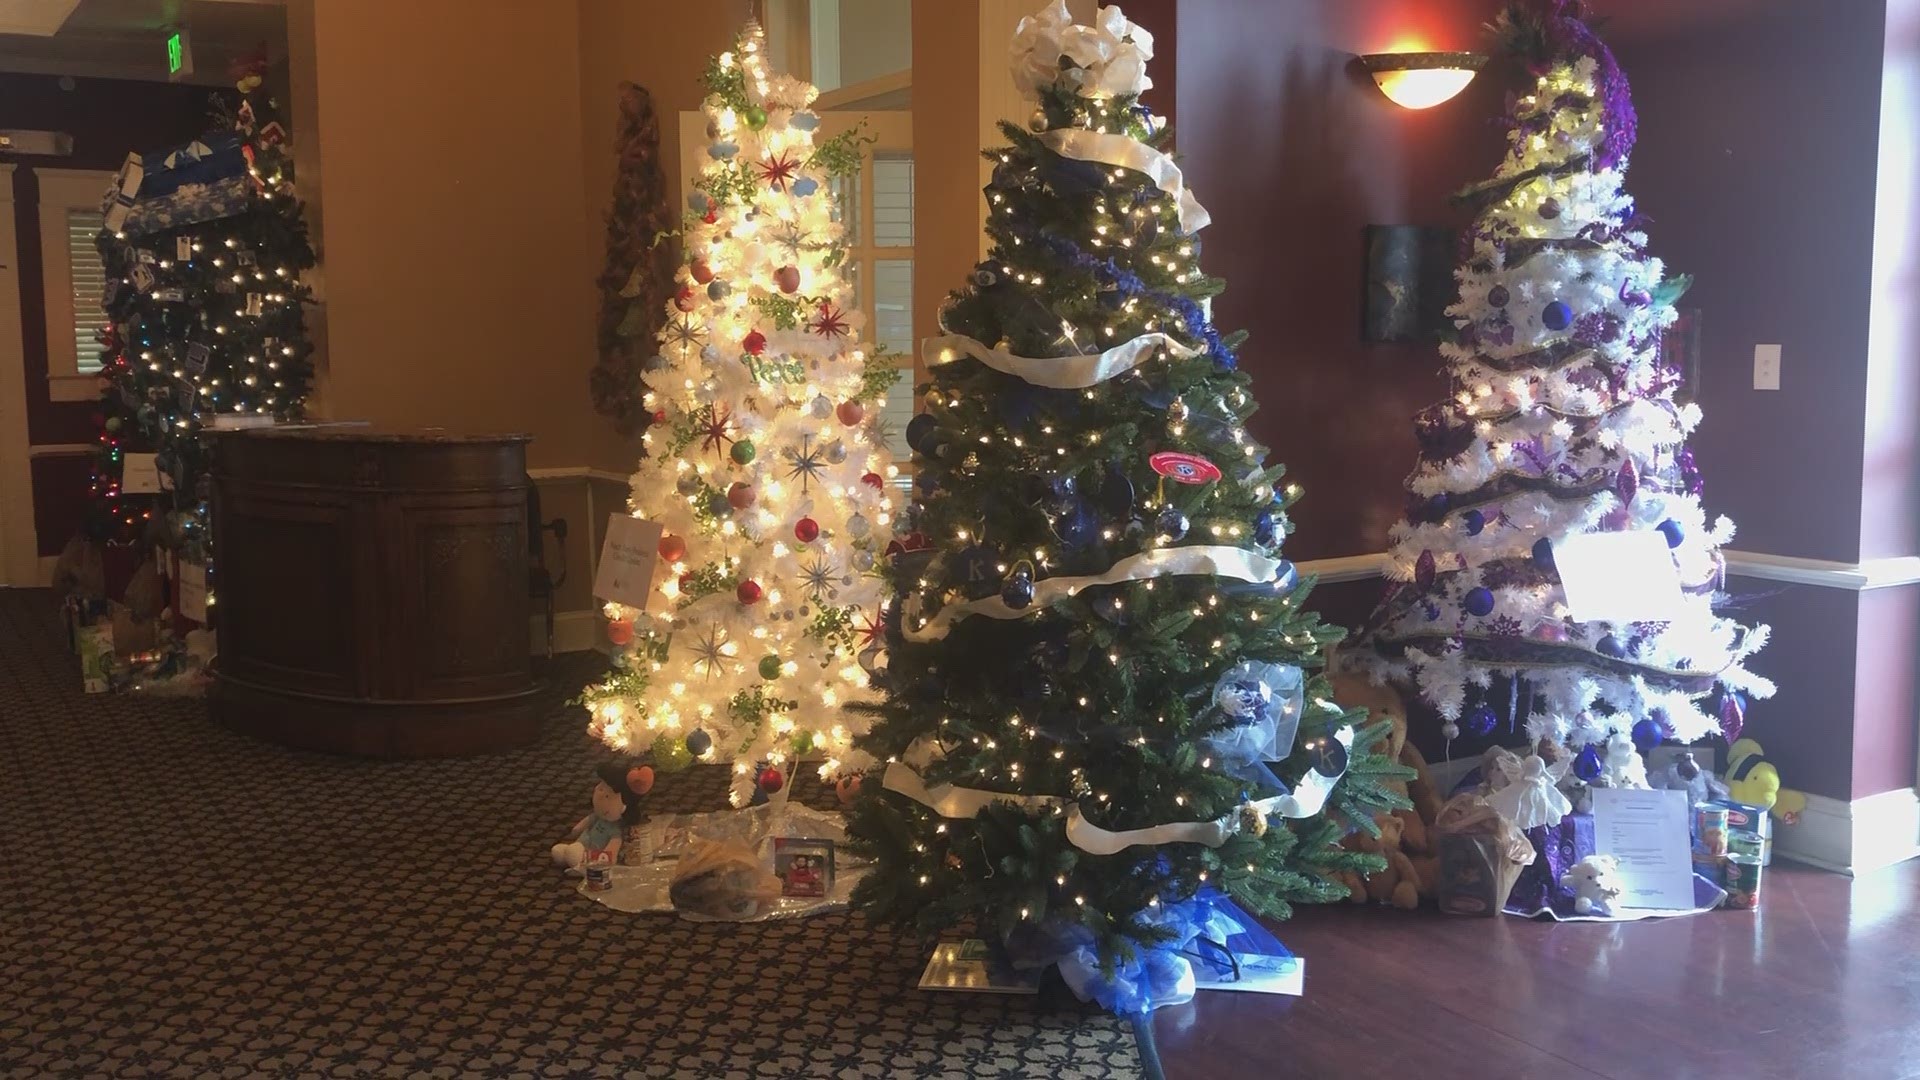 The Aurora Theatre's Festival of Trees is in its 13th season. To vote on the best tree, visitors can donate a non-perishable food item or an unwrapped toy.